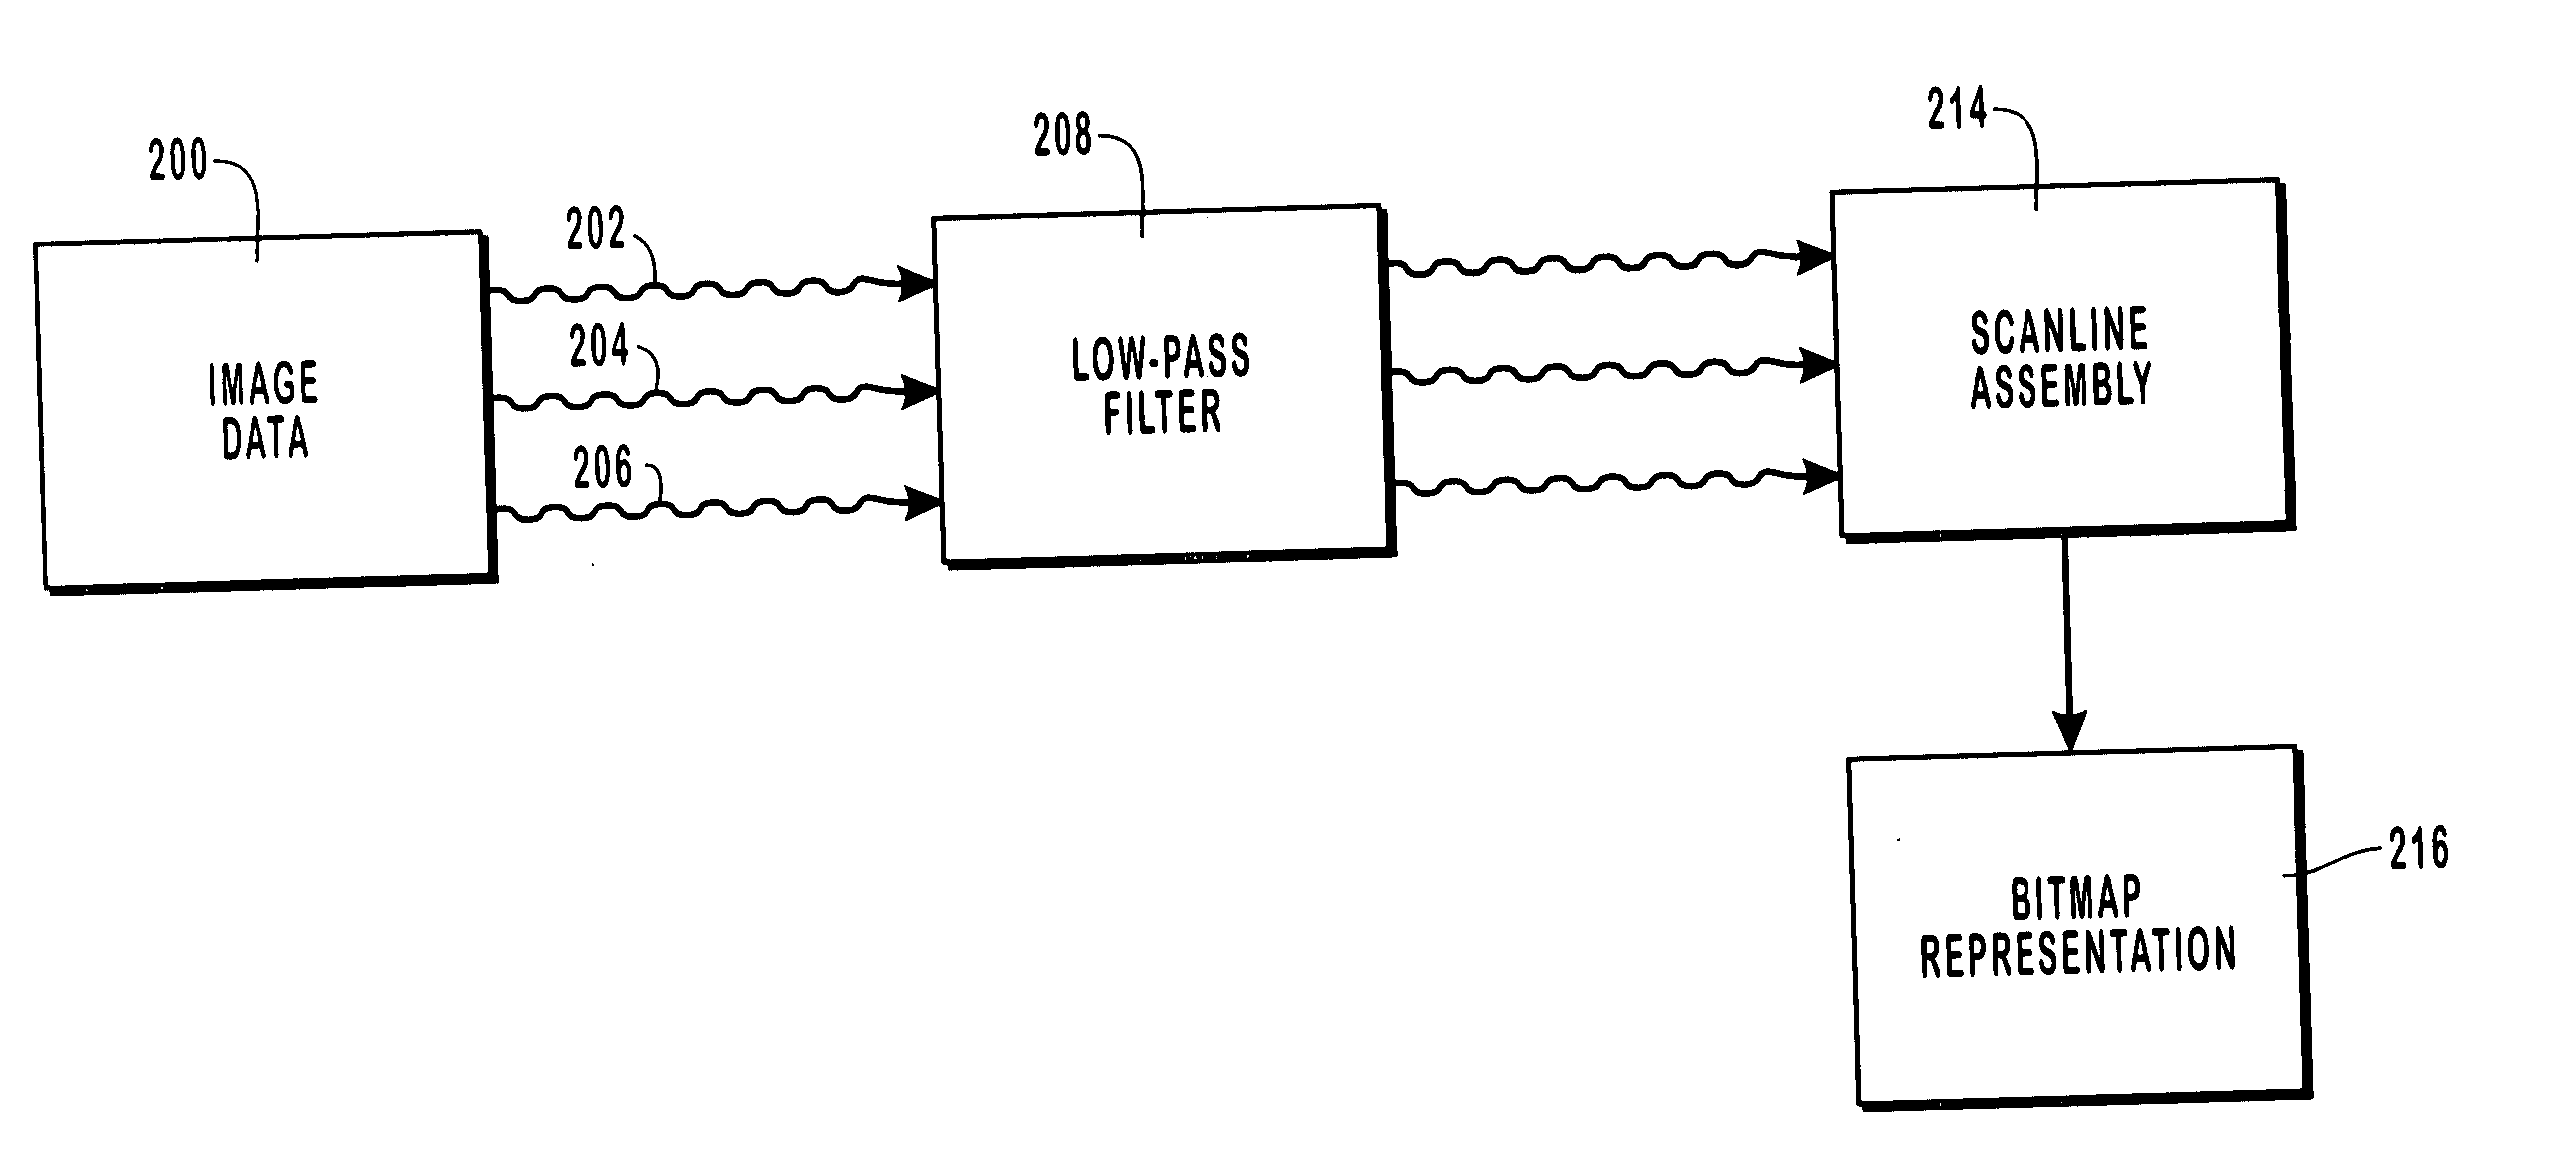 Filtering image data to obtain samples mapped to pixel sub-components of a display device